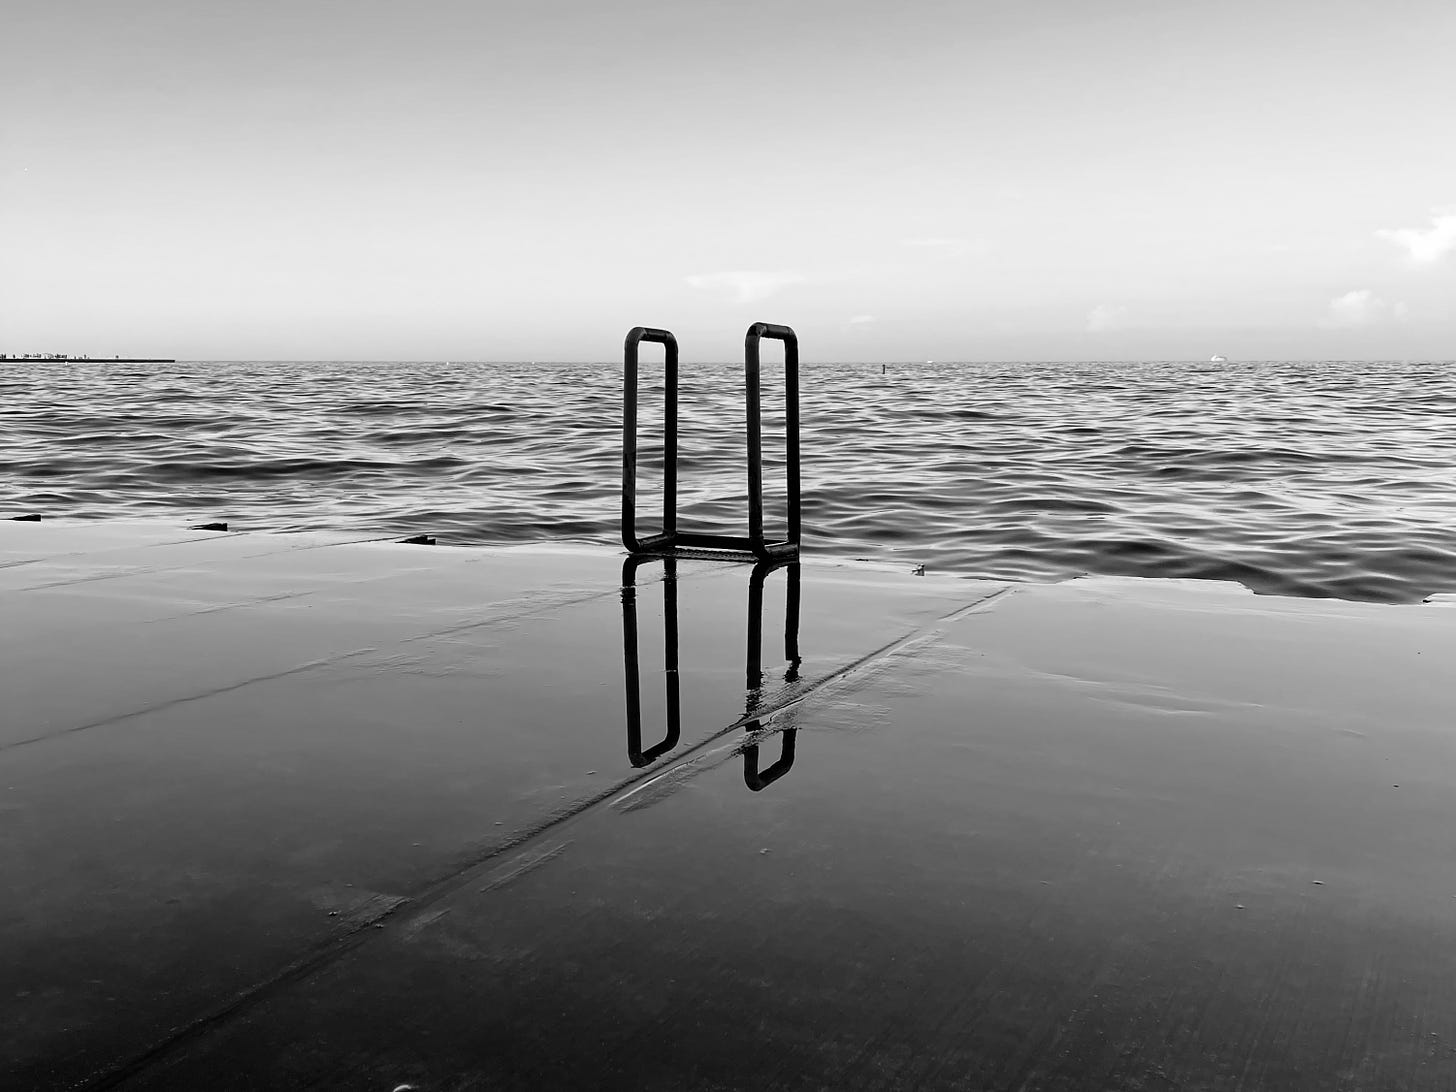 A black-and-white photo of the top of a ladder providing access to the water at a concrete-covered shore. The ladder and sky are smoothly reflected in a thin layer of water covering the concrete.